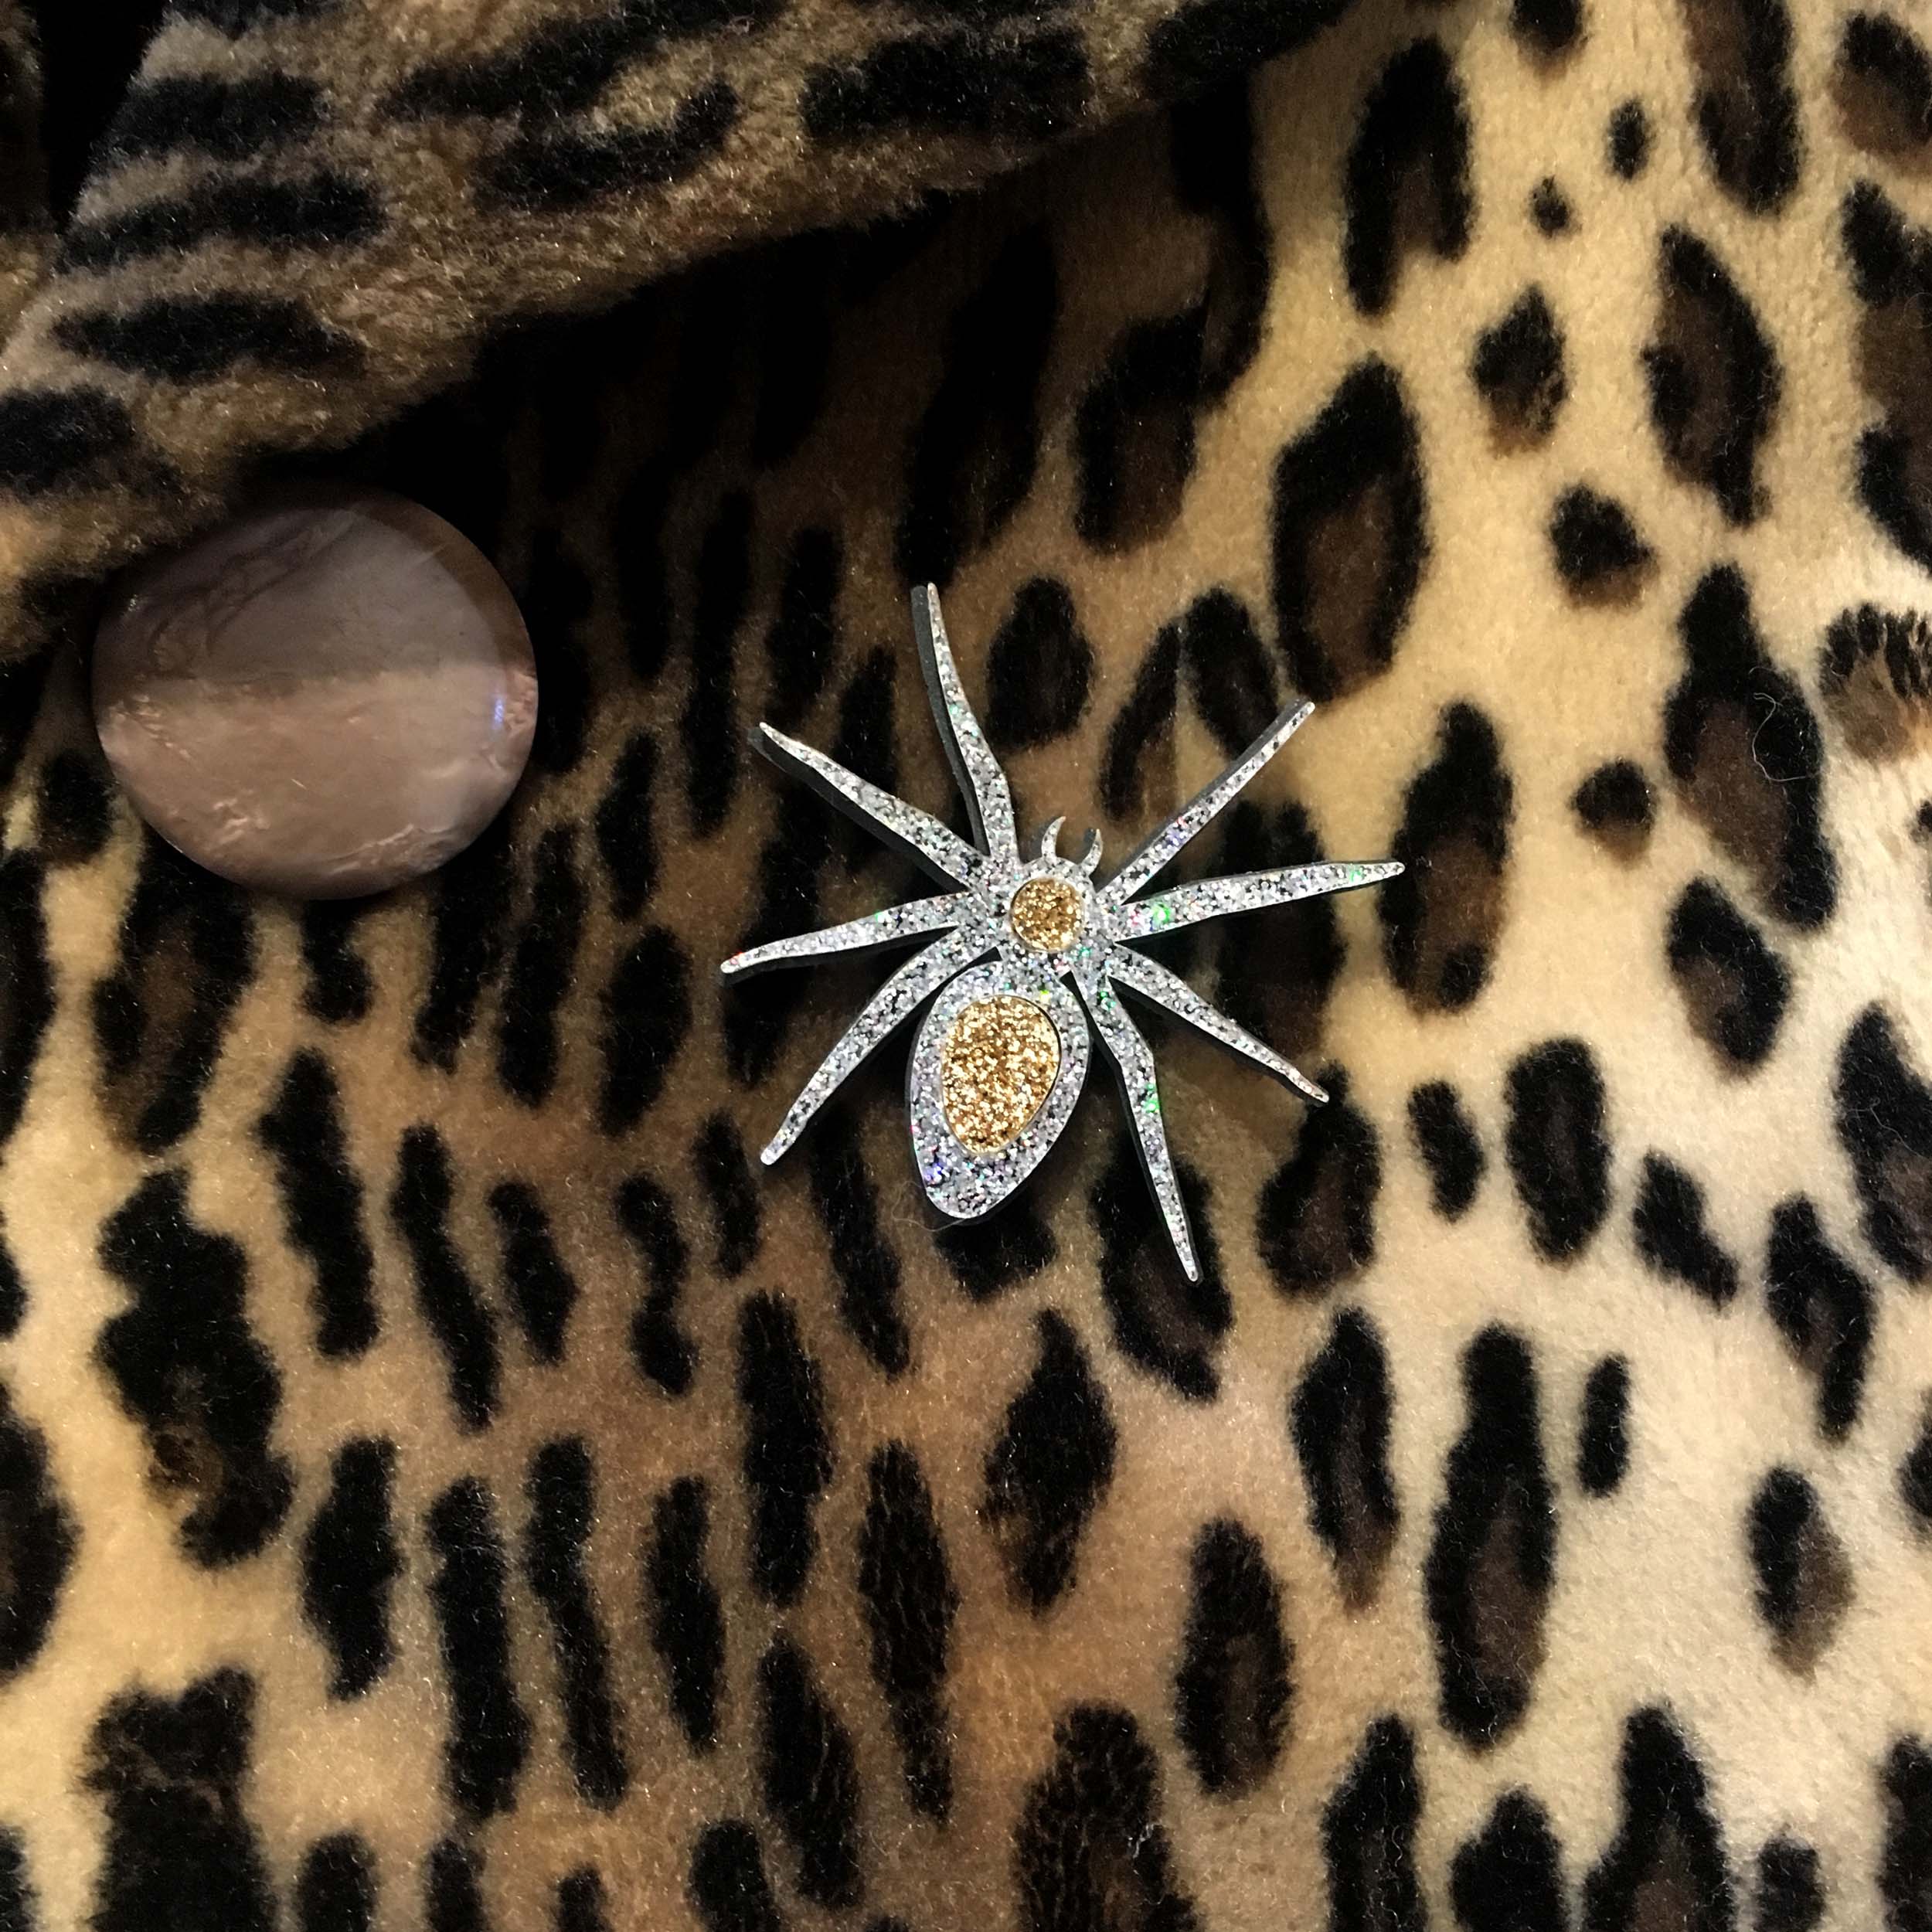 Silver Lady Hale Spider brooch shown worn on a leopard print coat. 